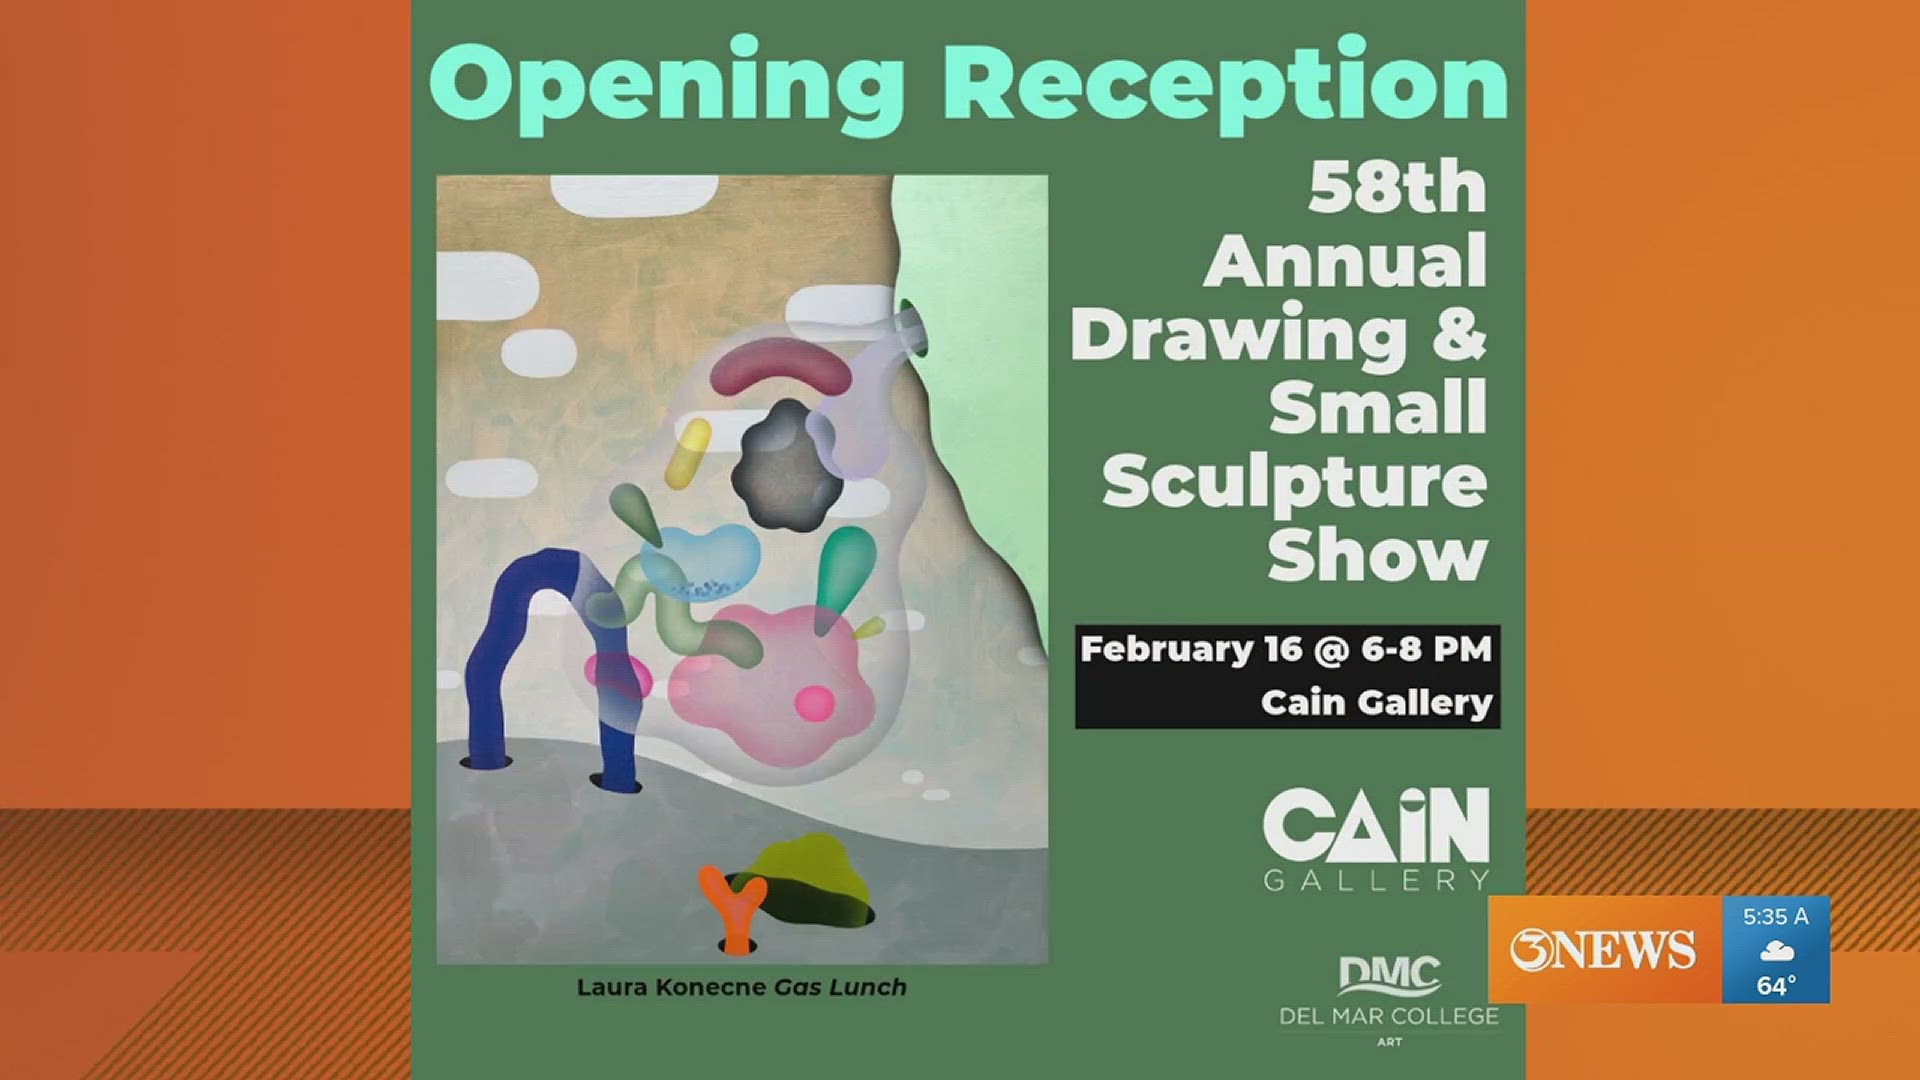 Nearly 800 artists submitted their work to the Del Mar College show. The event will take place Friday, Feb. 16 at the DMC Cain Gallery.